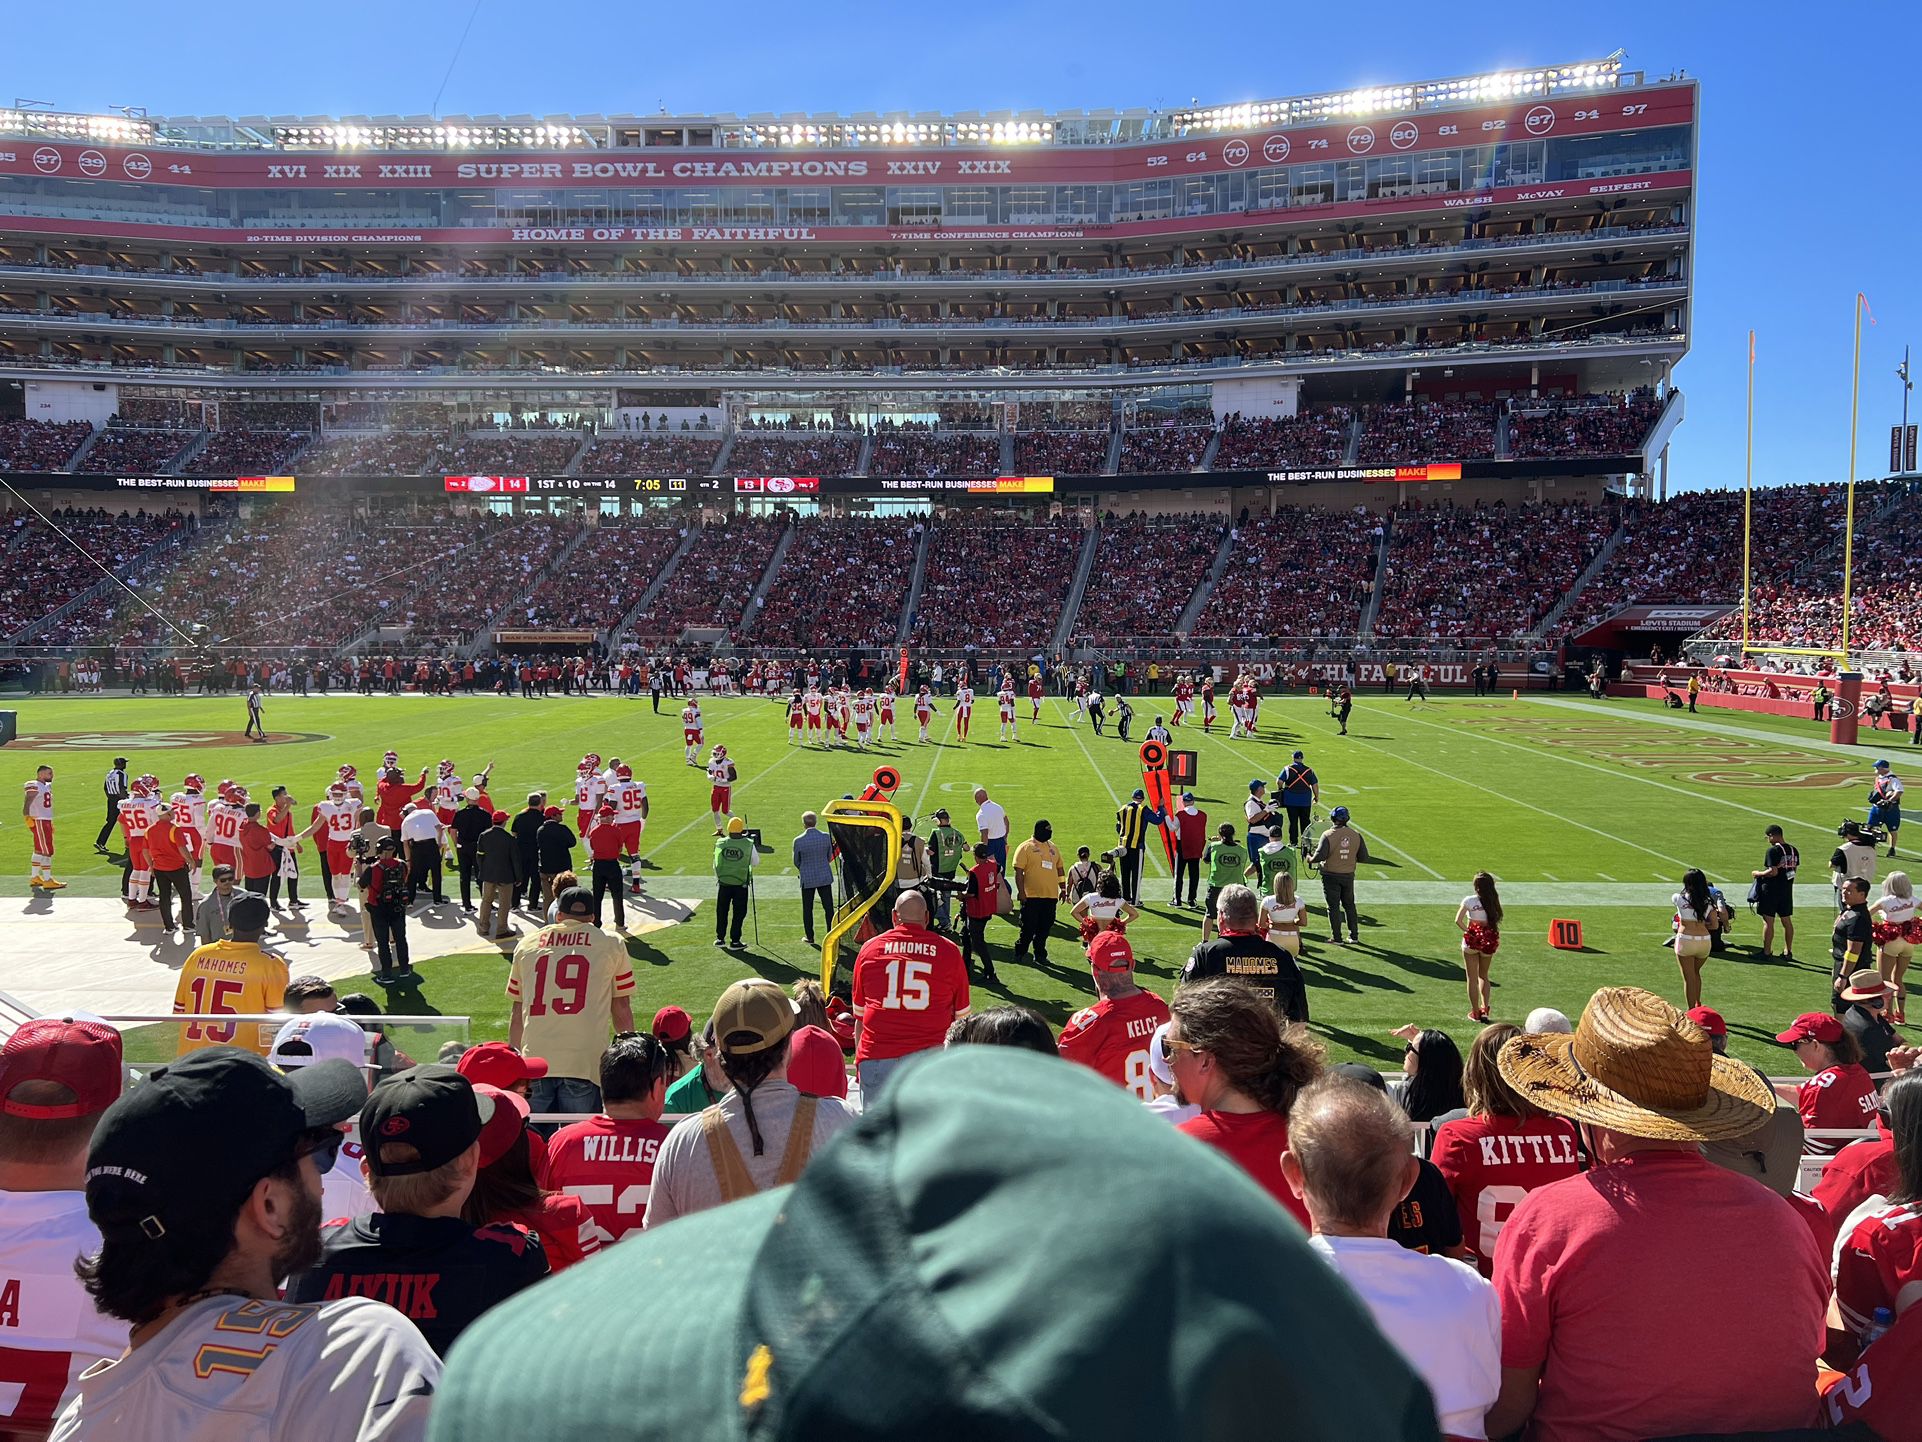 49ers vs. Dolphins - Section 111 Row 9 - Red Zone 2 Tickets $410 Each  OBO